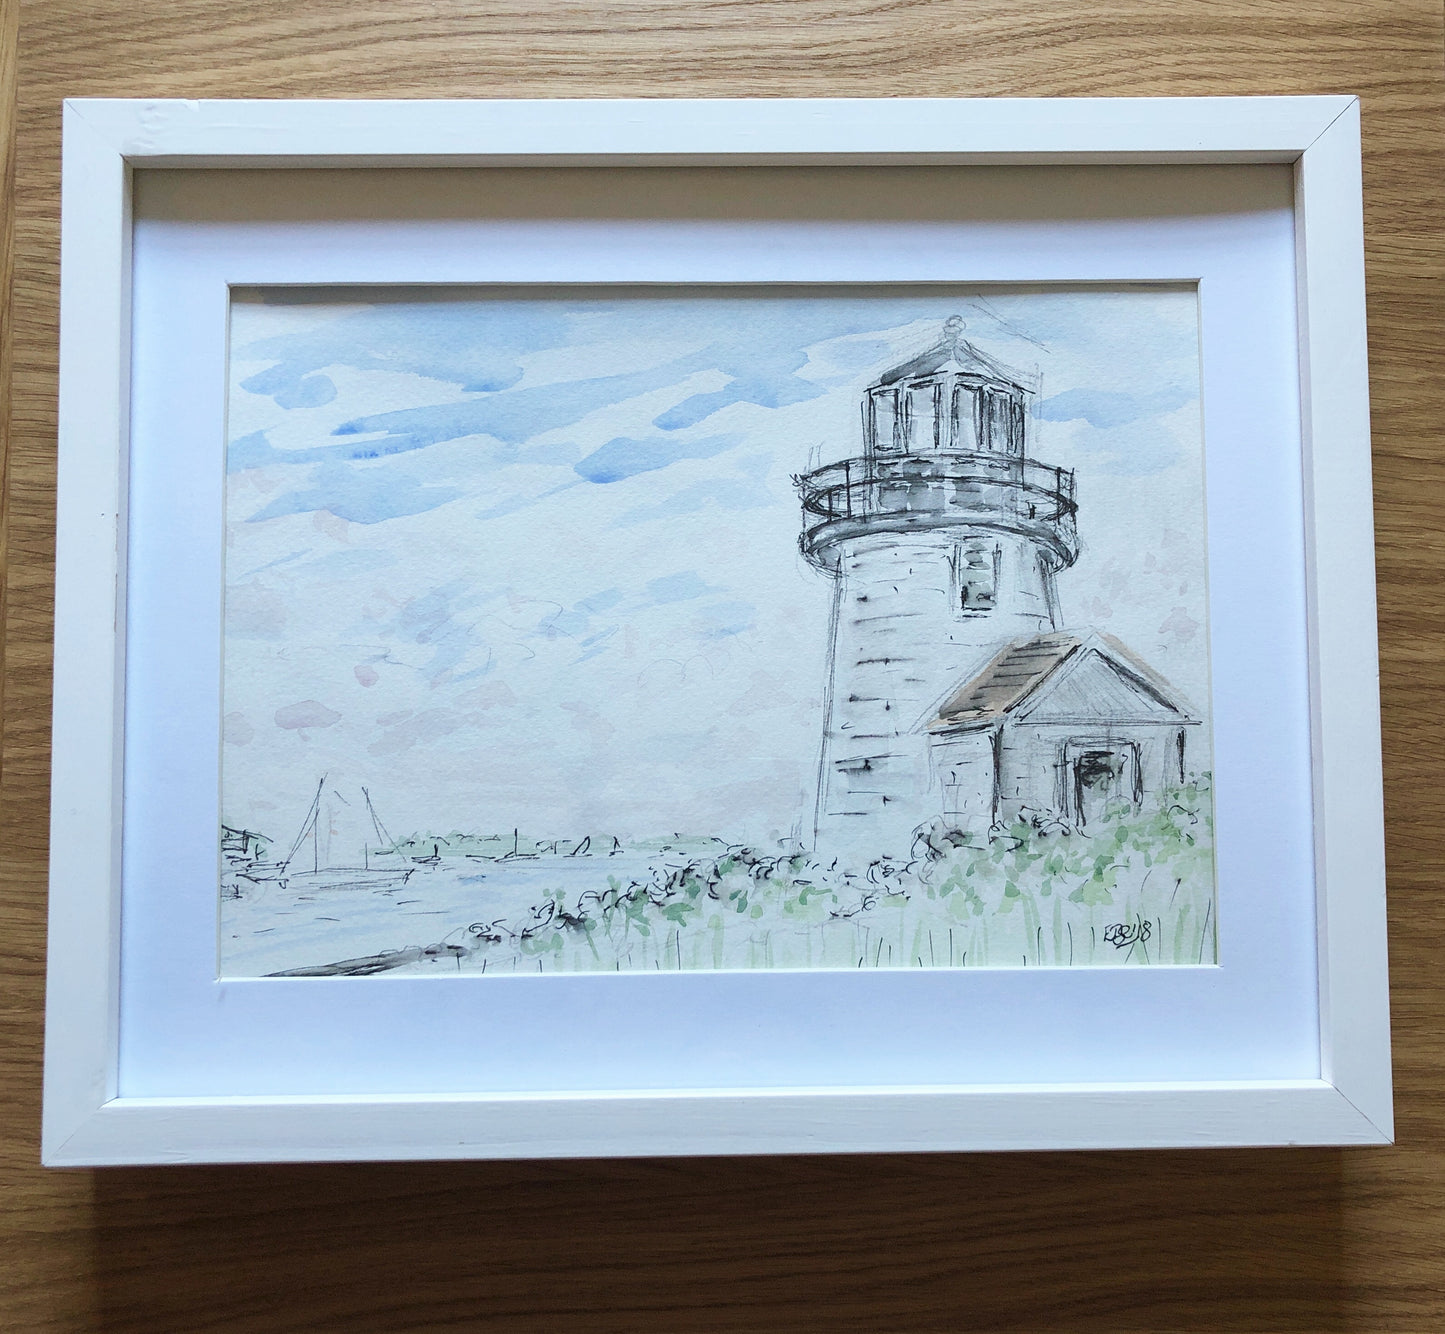 Hyannis Harbour Lighthouse, Cape Cod - SOLD